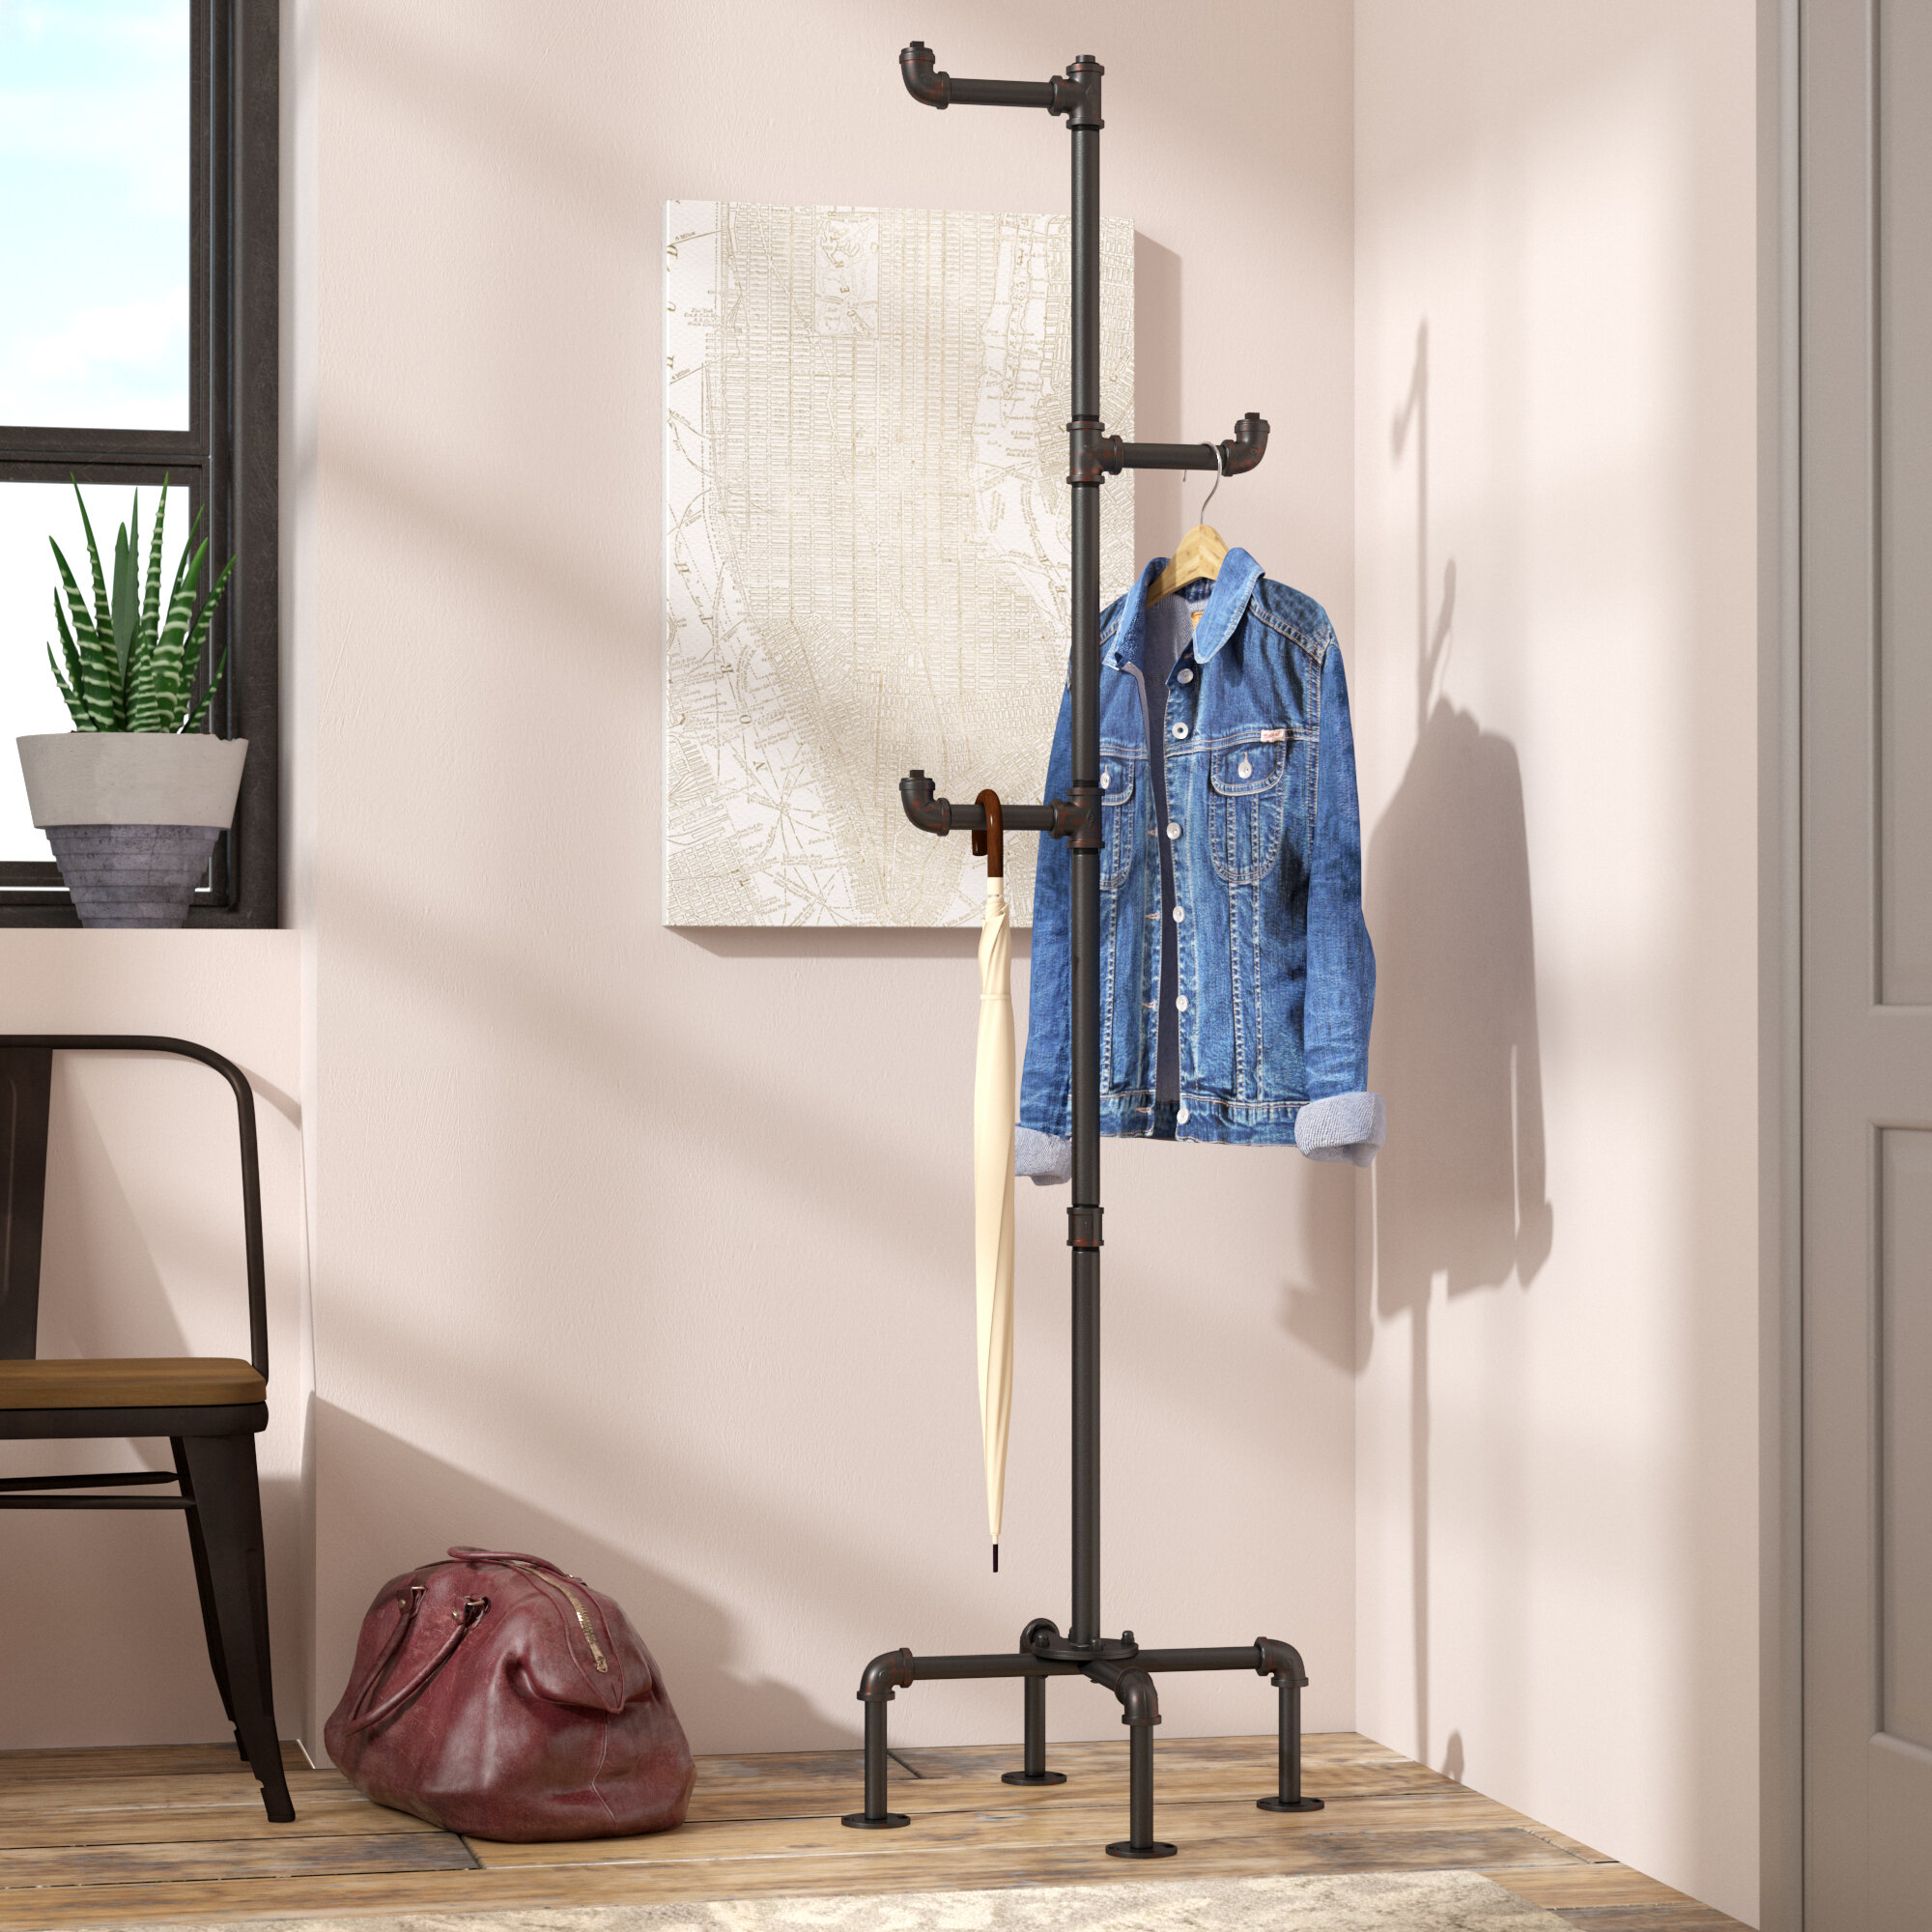 What material should wall hooks for coats